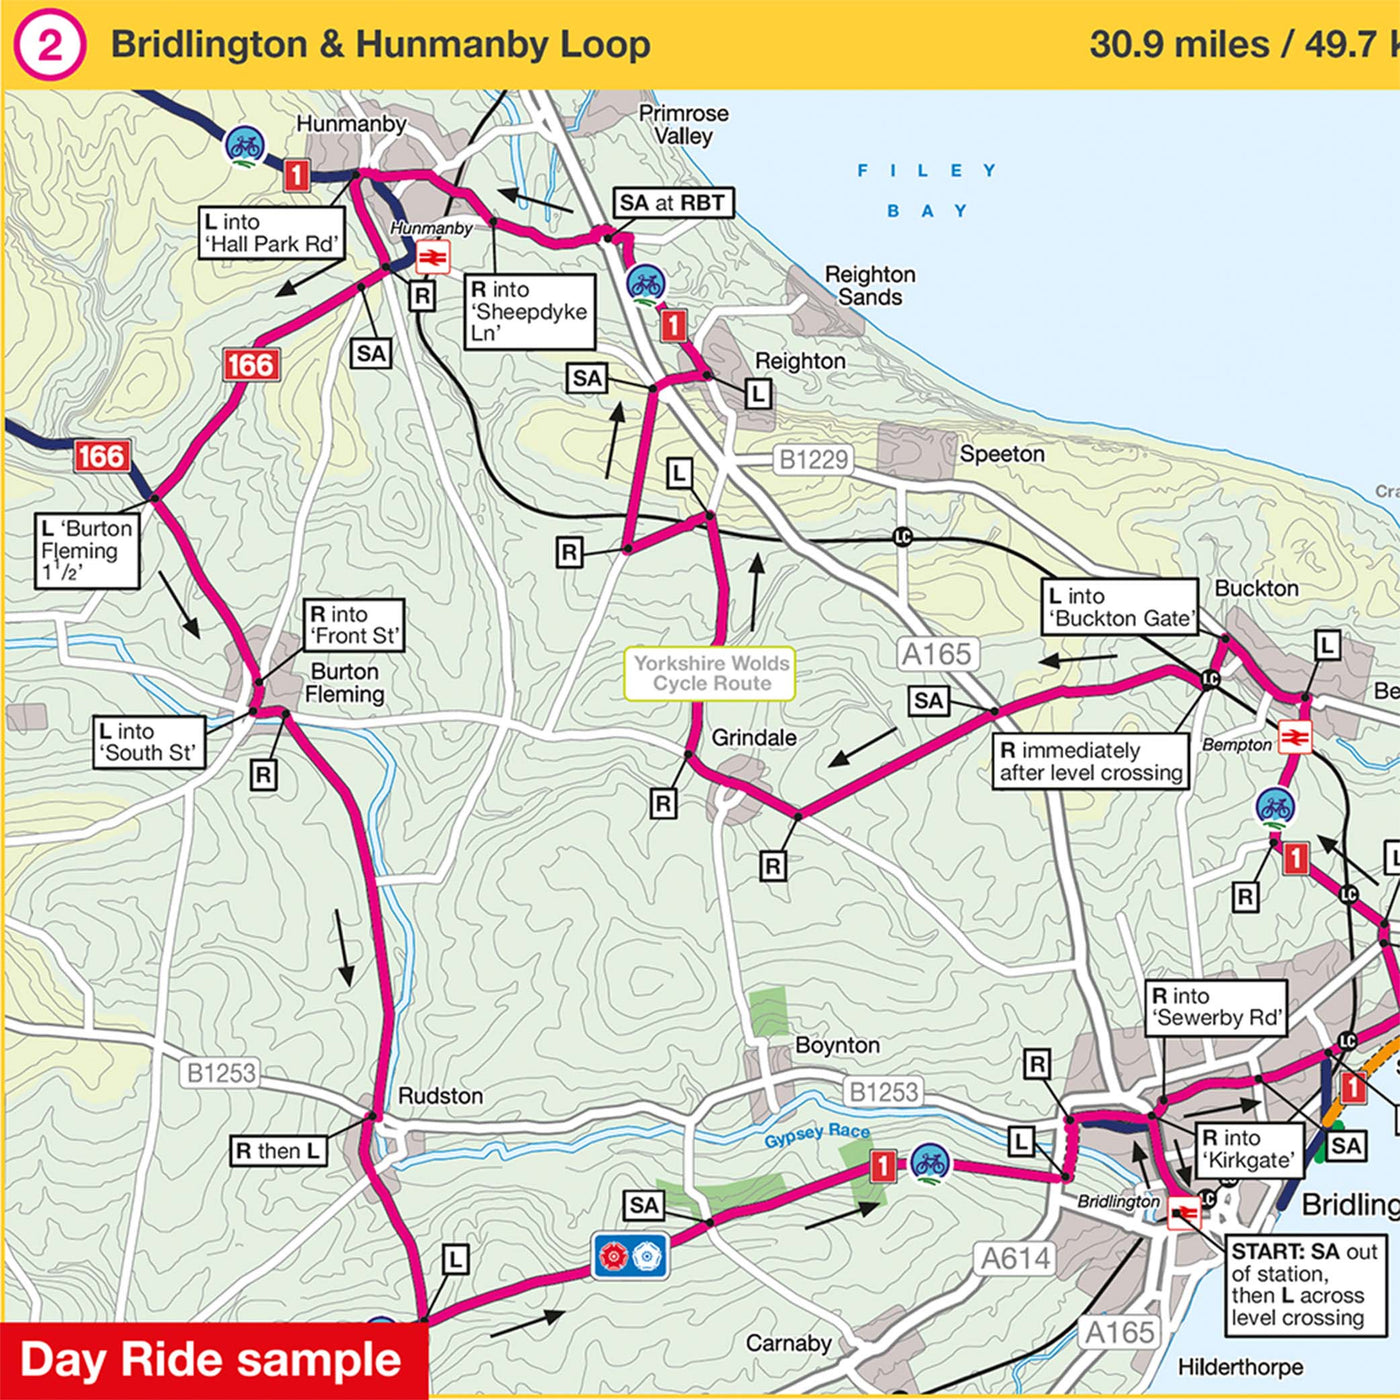 Day ride sample: Bridlington and Hunmanby Loop, 30.9 miles